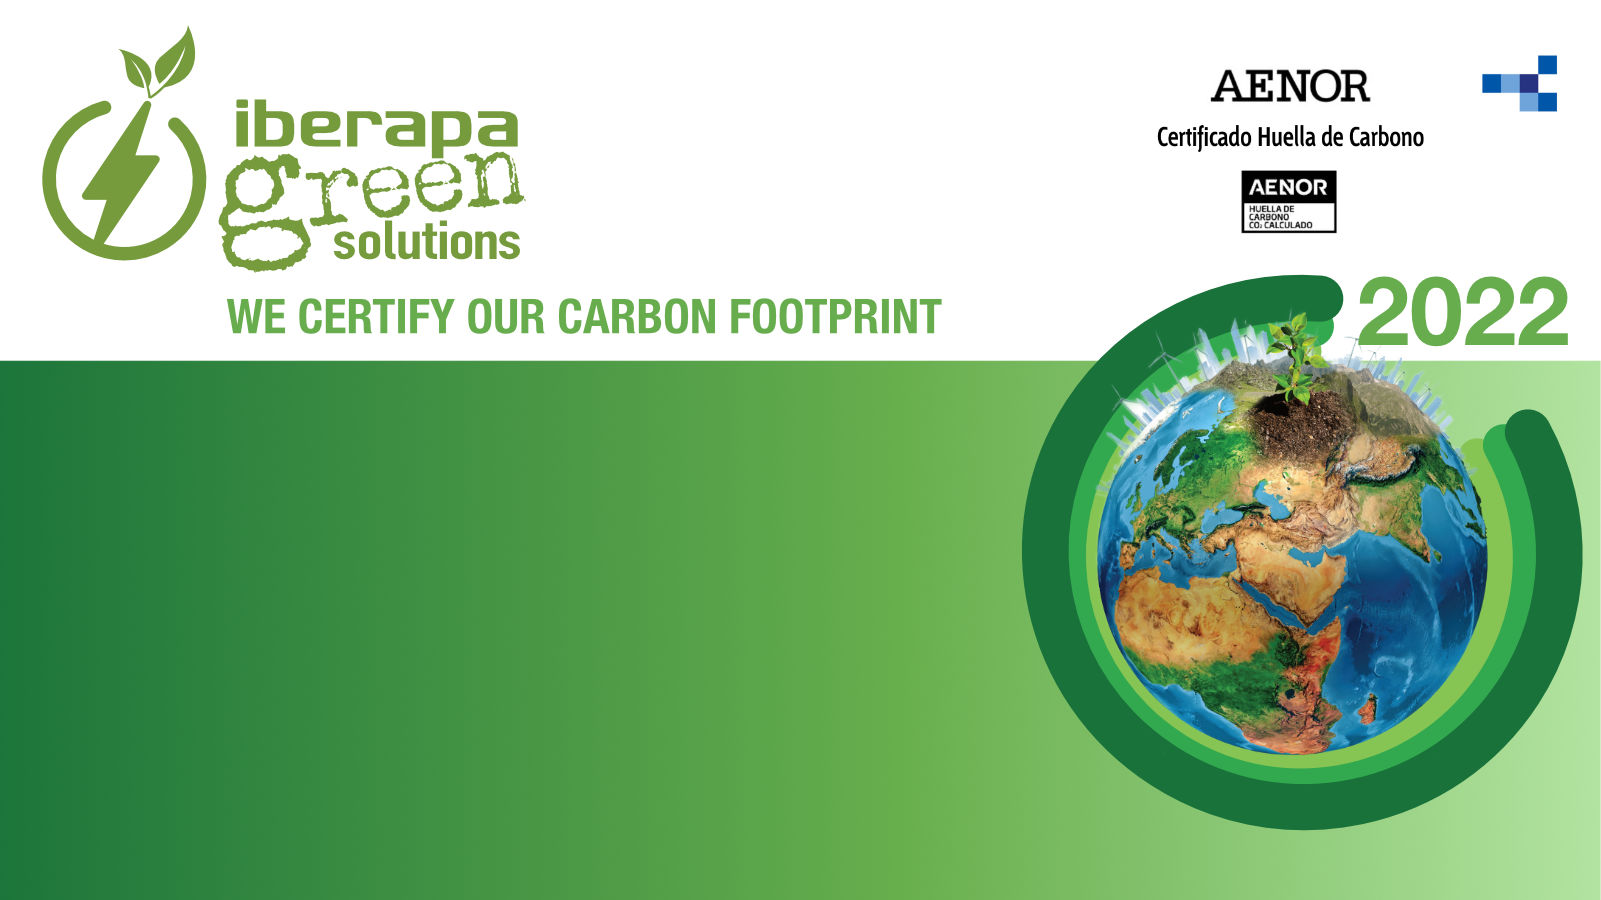 ISO 14064 certification of our carbon footprint